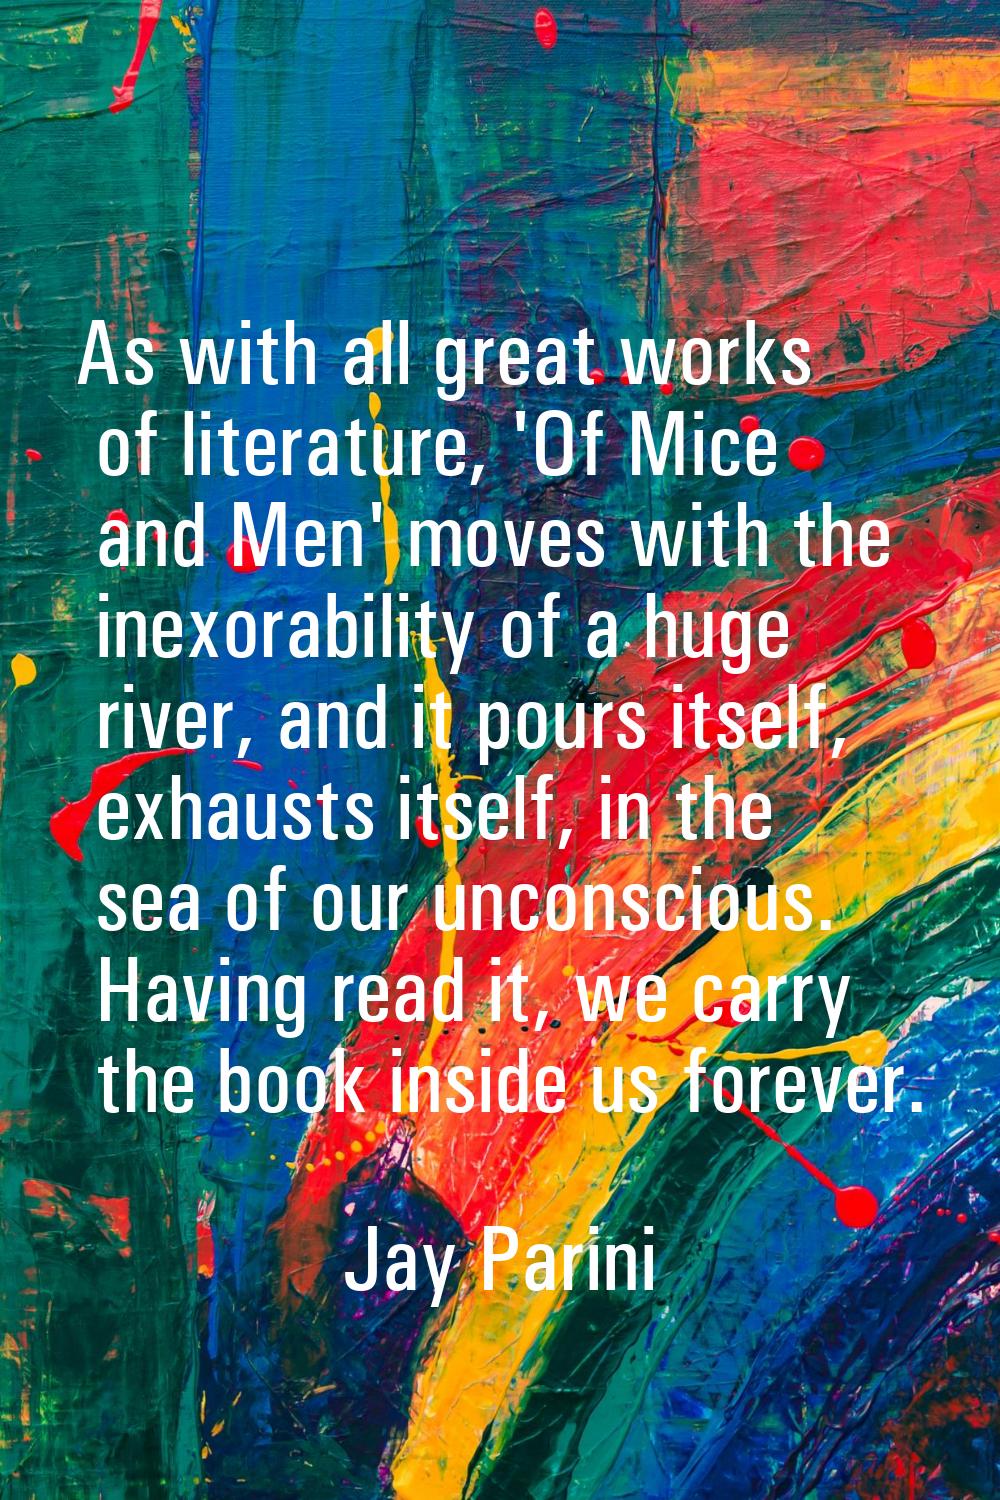 As with all great works of literature, 'Of Mice and Men' moves with the inexorability of a huge riv